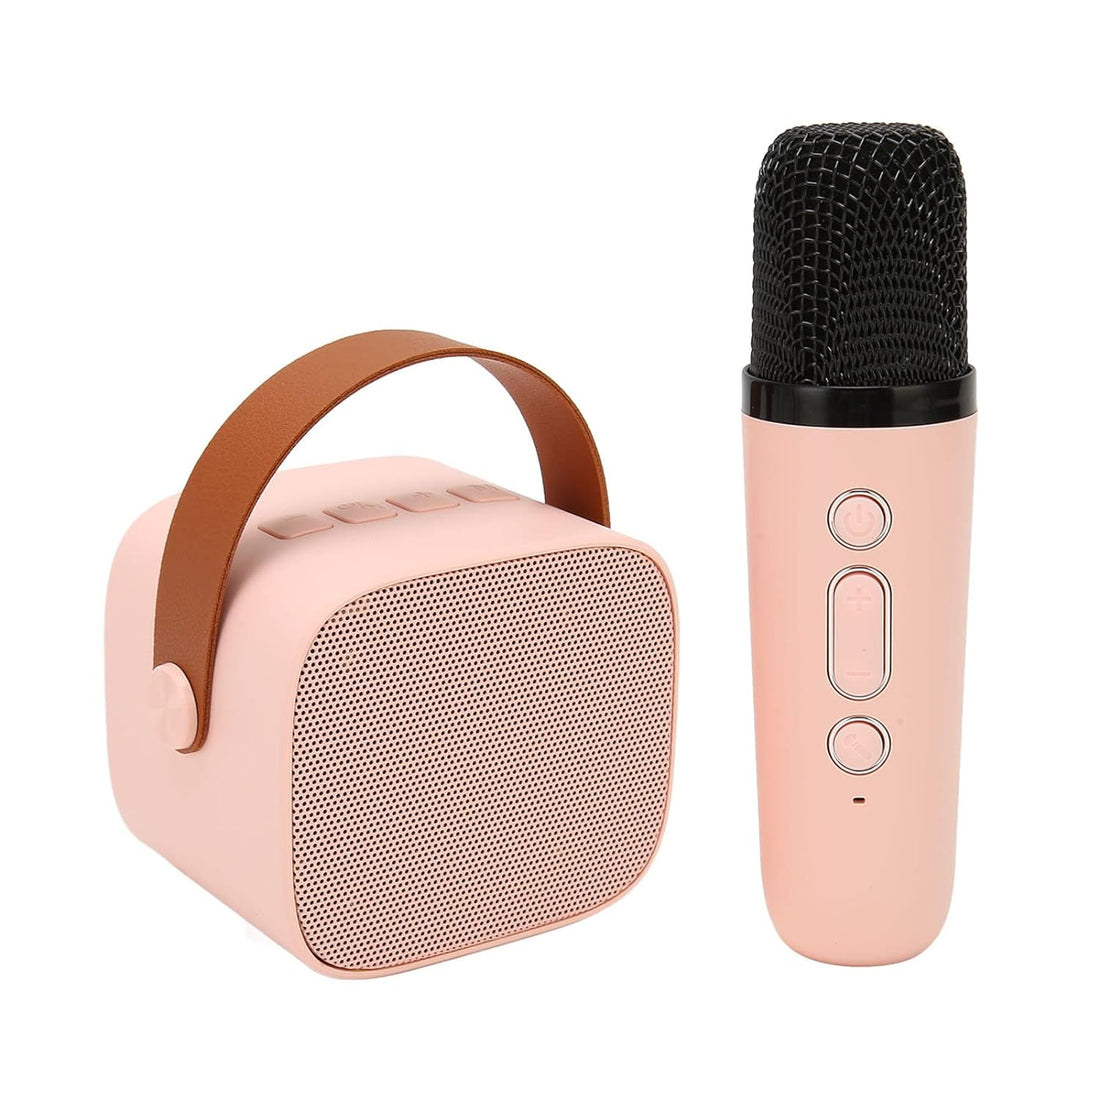 Shanrya Microphone Set with Speaker, Stable Adjustable Volume, Portable Karaoke Machine, Rechargeable, HD Stereo, 6 Sound Effects for Parties for Kids (Pink)